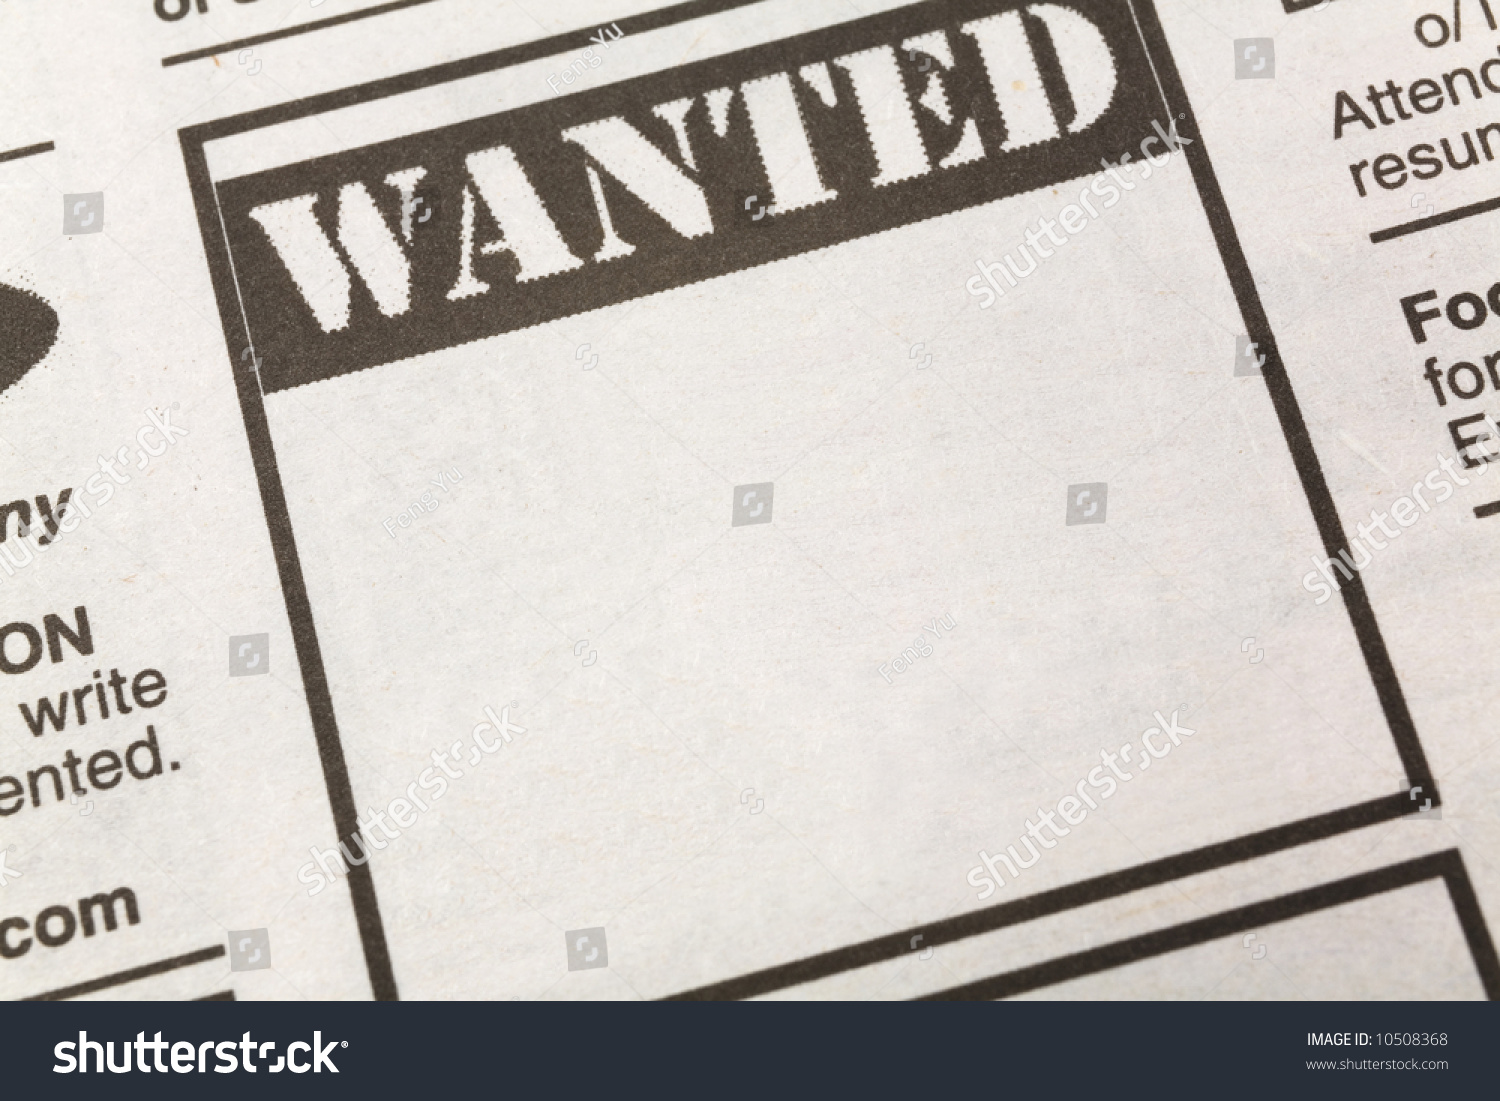 stock-photo-newspaper-wanted-ad-employment-concept-10508368.jpg